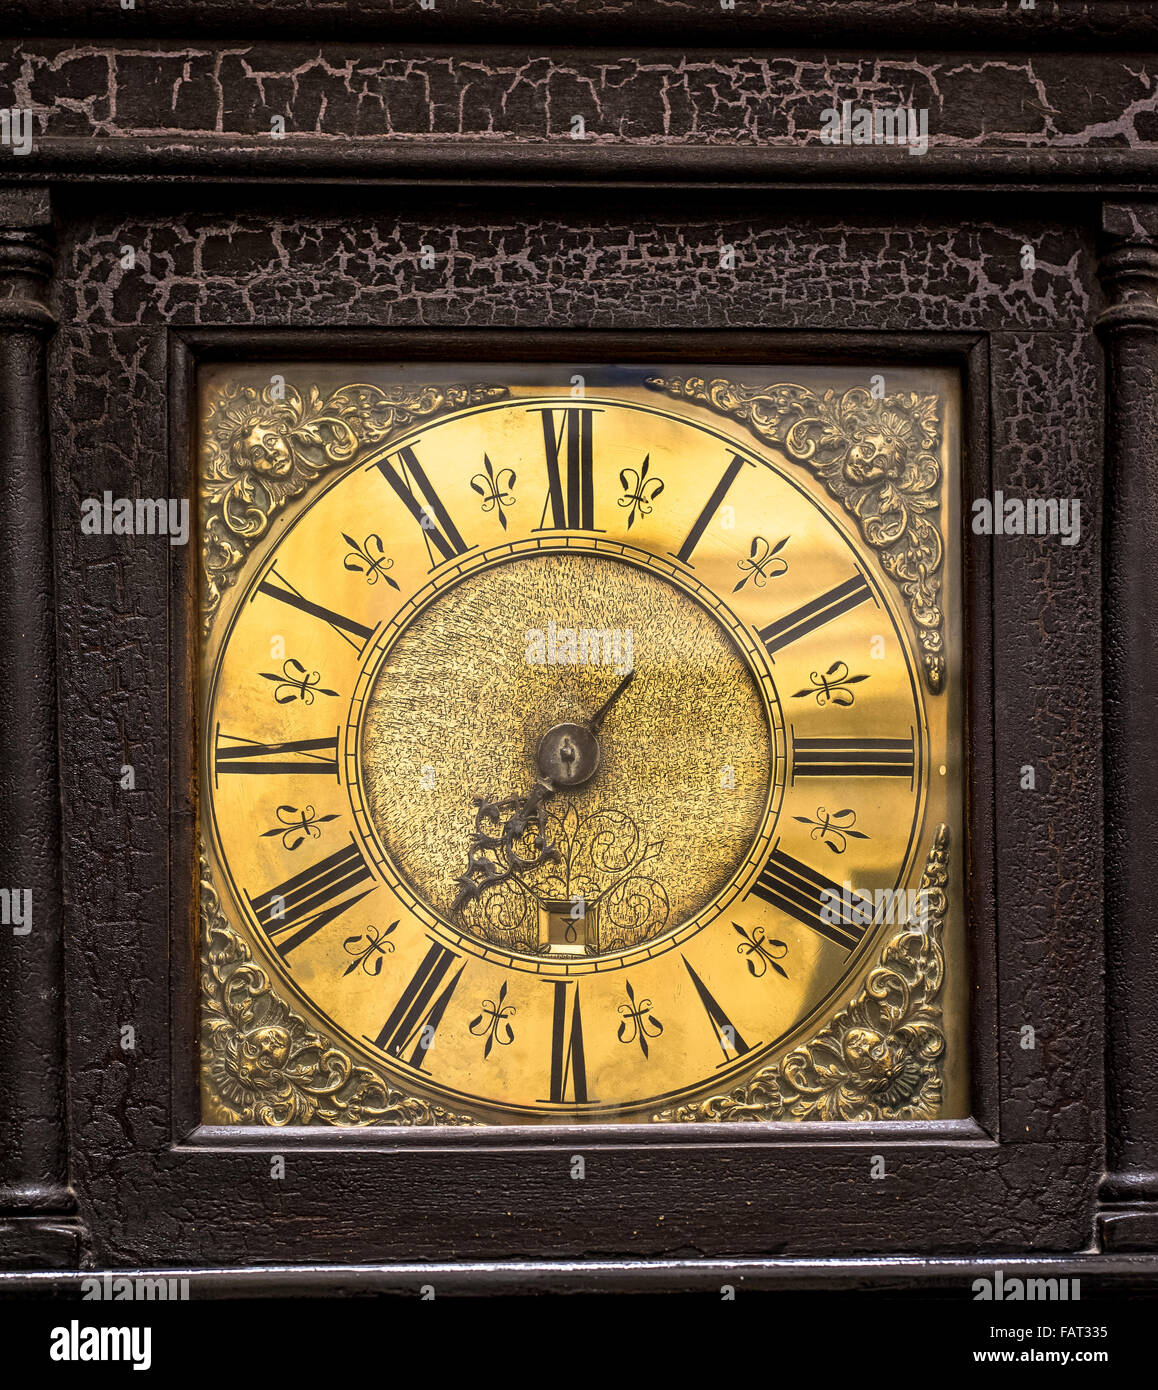 Antique grandfather clock face detail with distressed wooden casing. Stock Photo